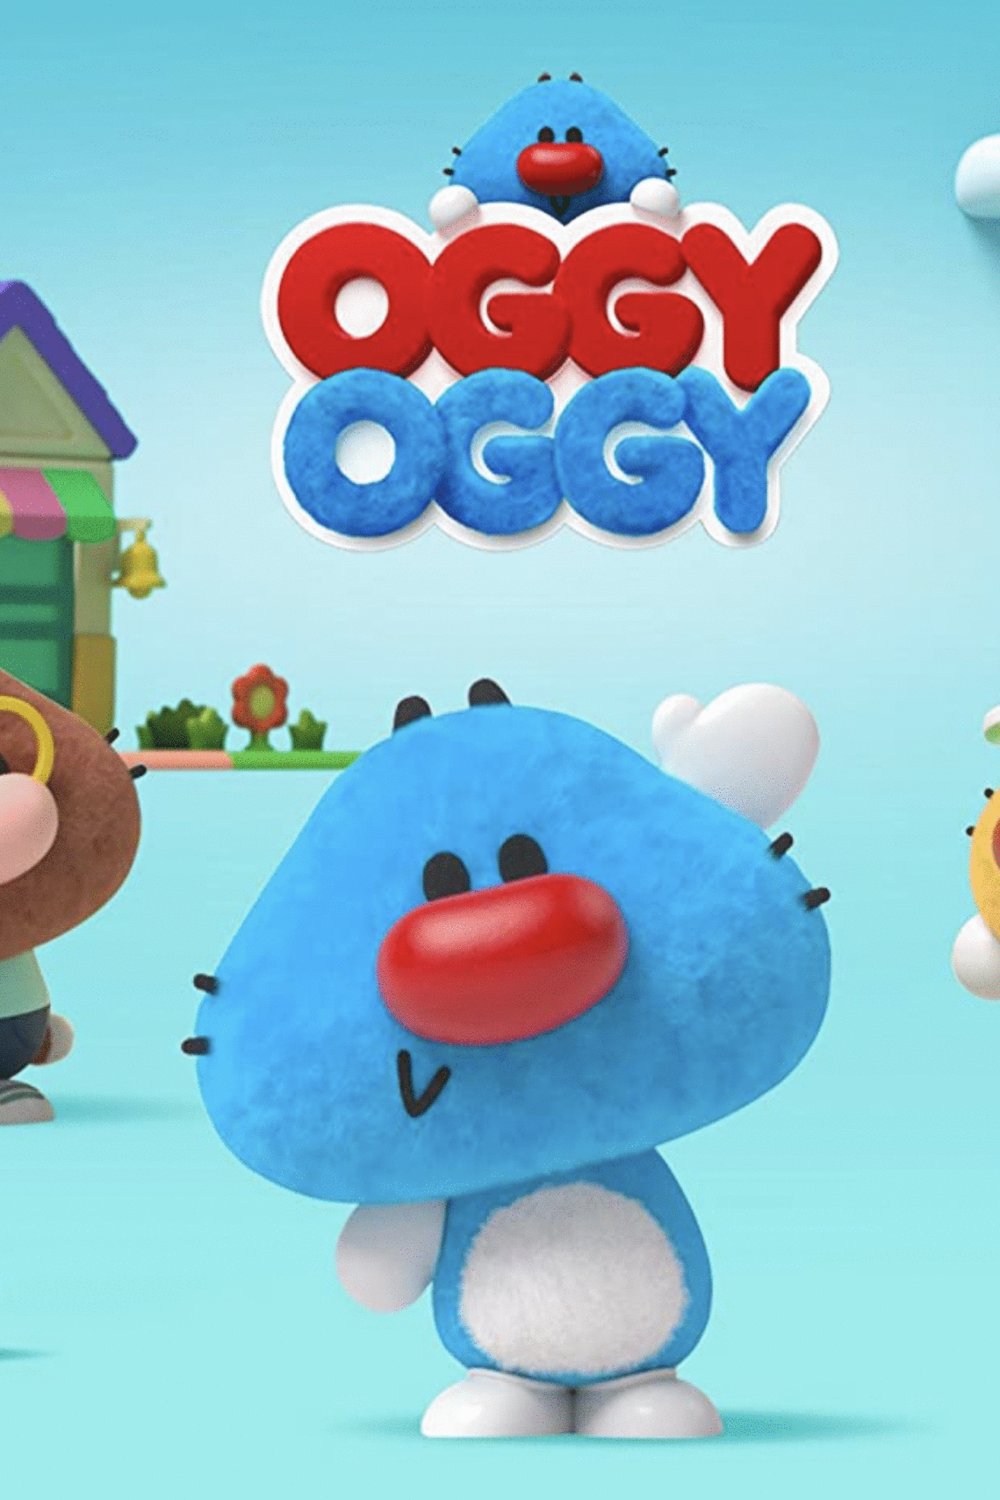 Poster of the movie Oggy Oggy